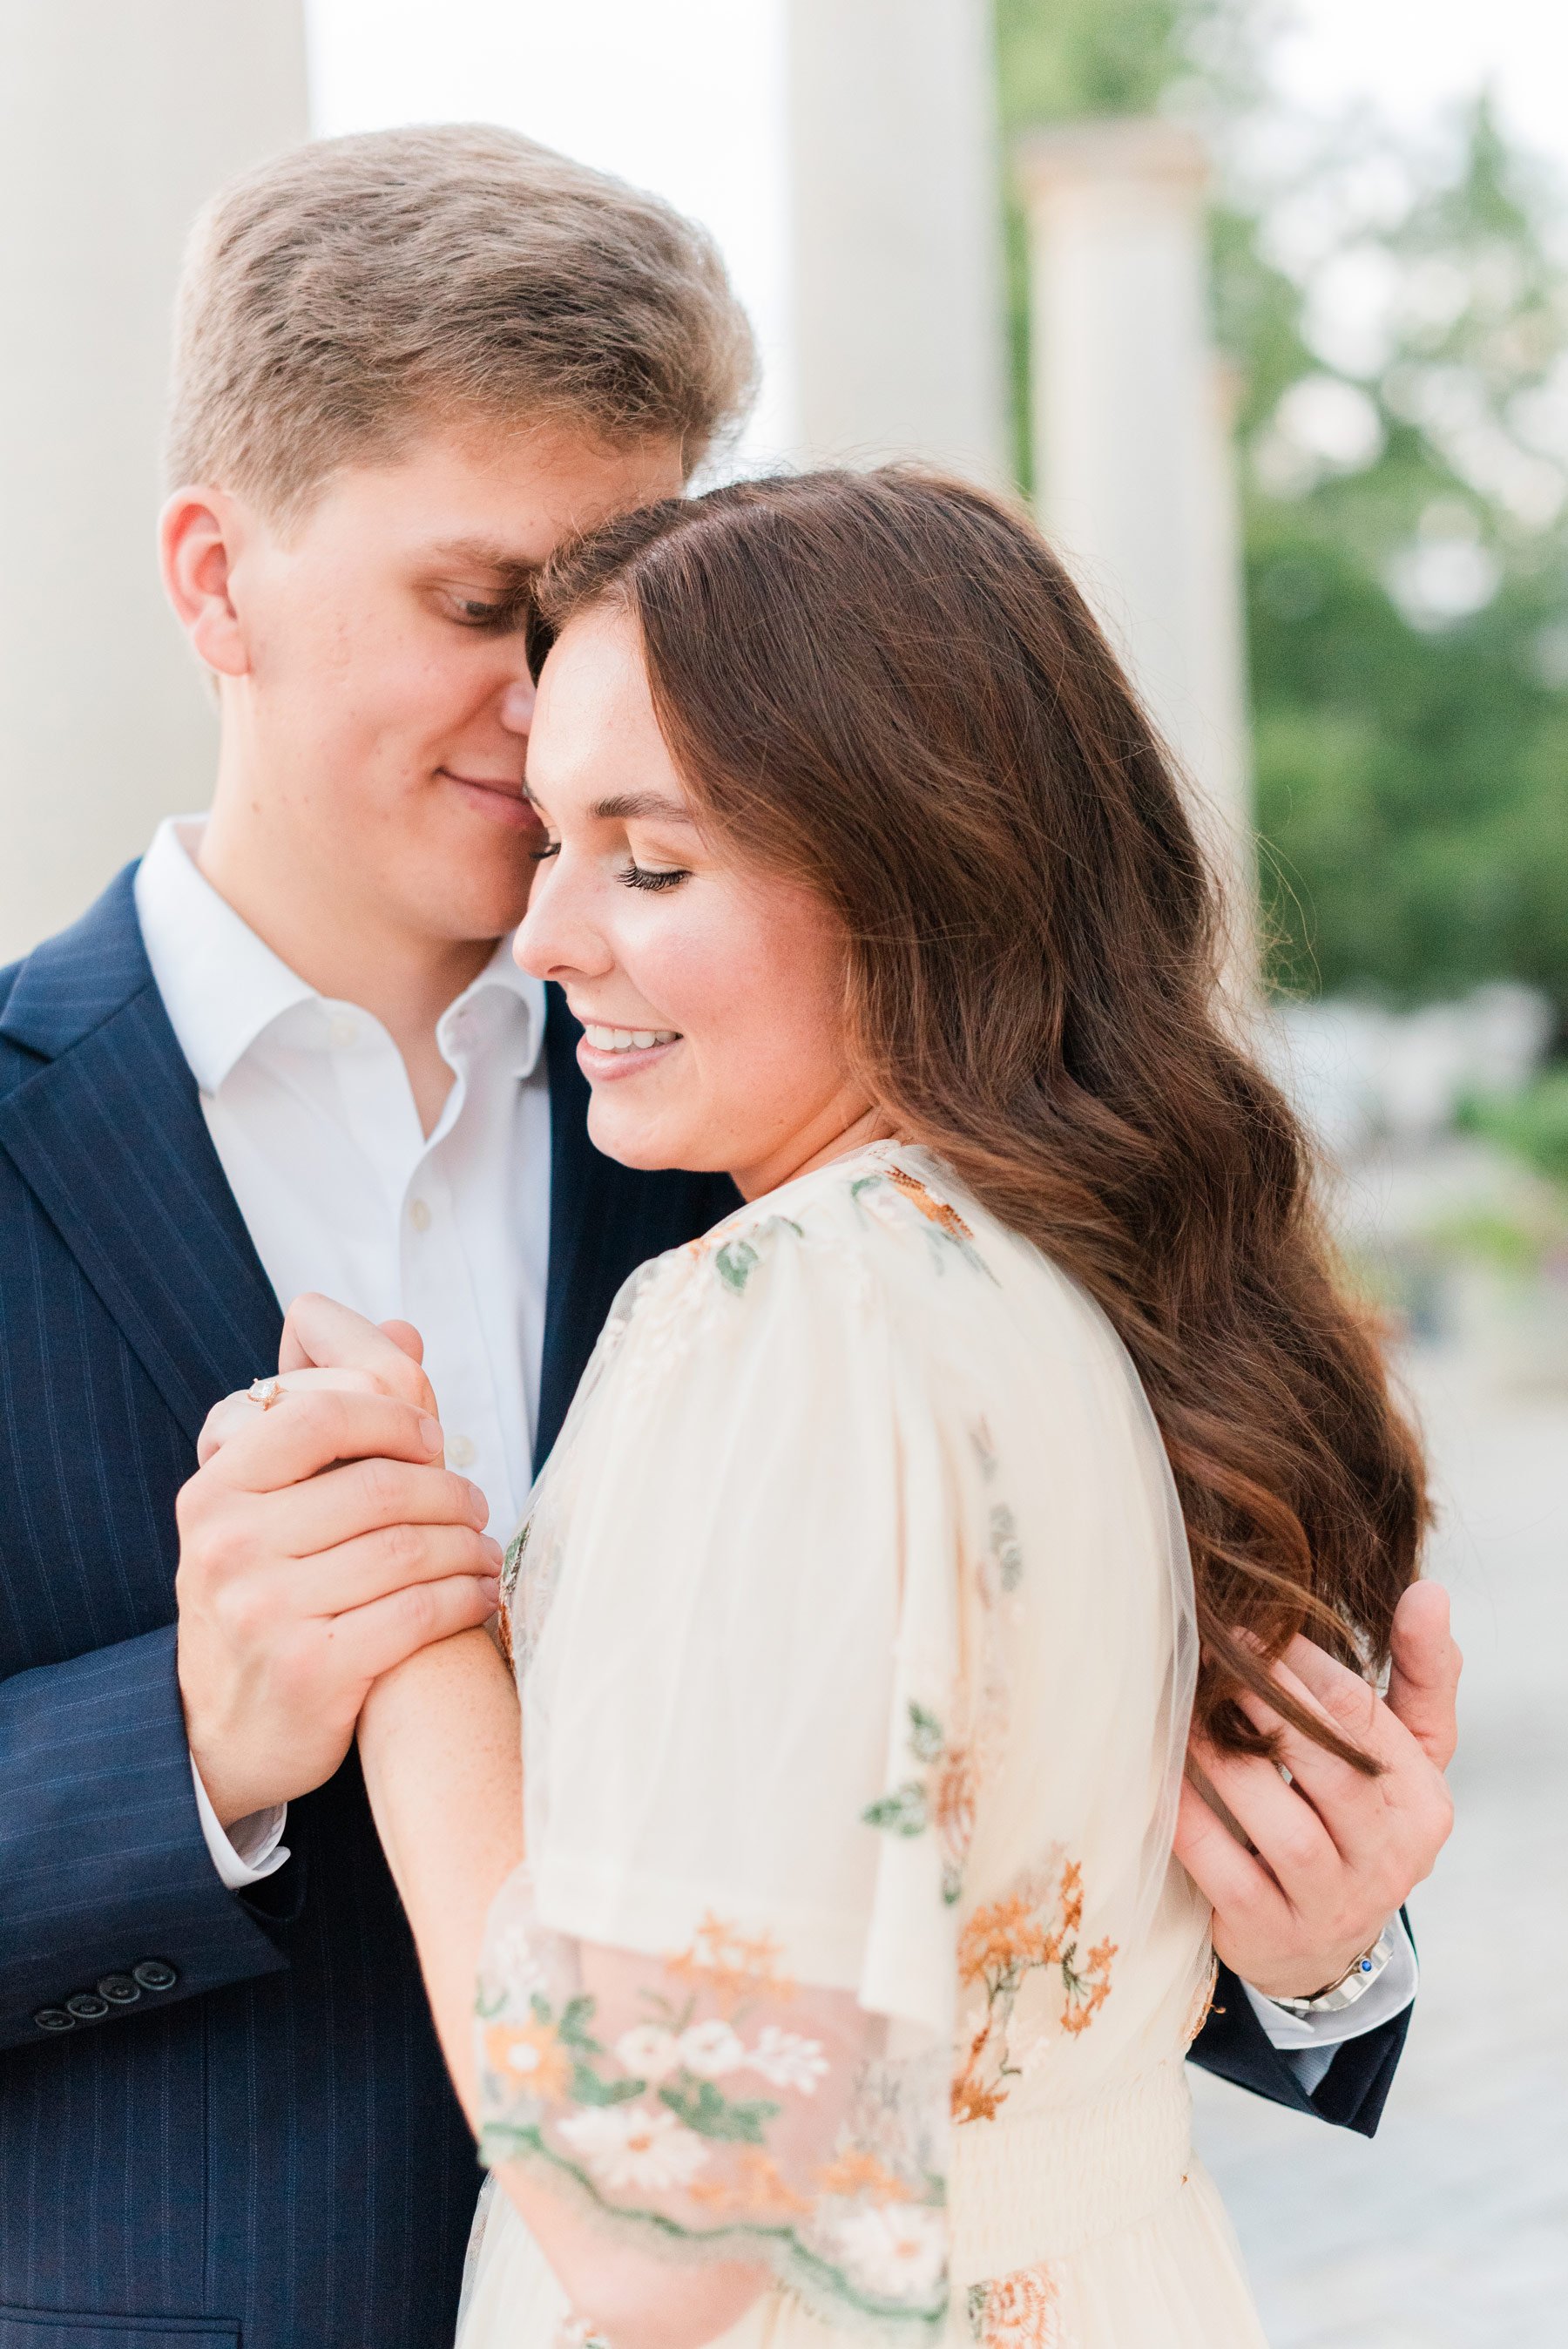    I love this flowing boho dress with floral detailing against his classic pinstriped suit. #trilithstudios #georgiaweddingphotographer #fayettevillephotographer #fayettevilleengagementphotos #outdoorengagements #formalengagementphotos #reasonstoboo